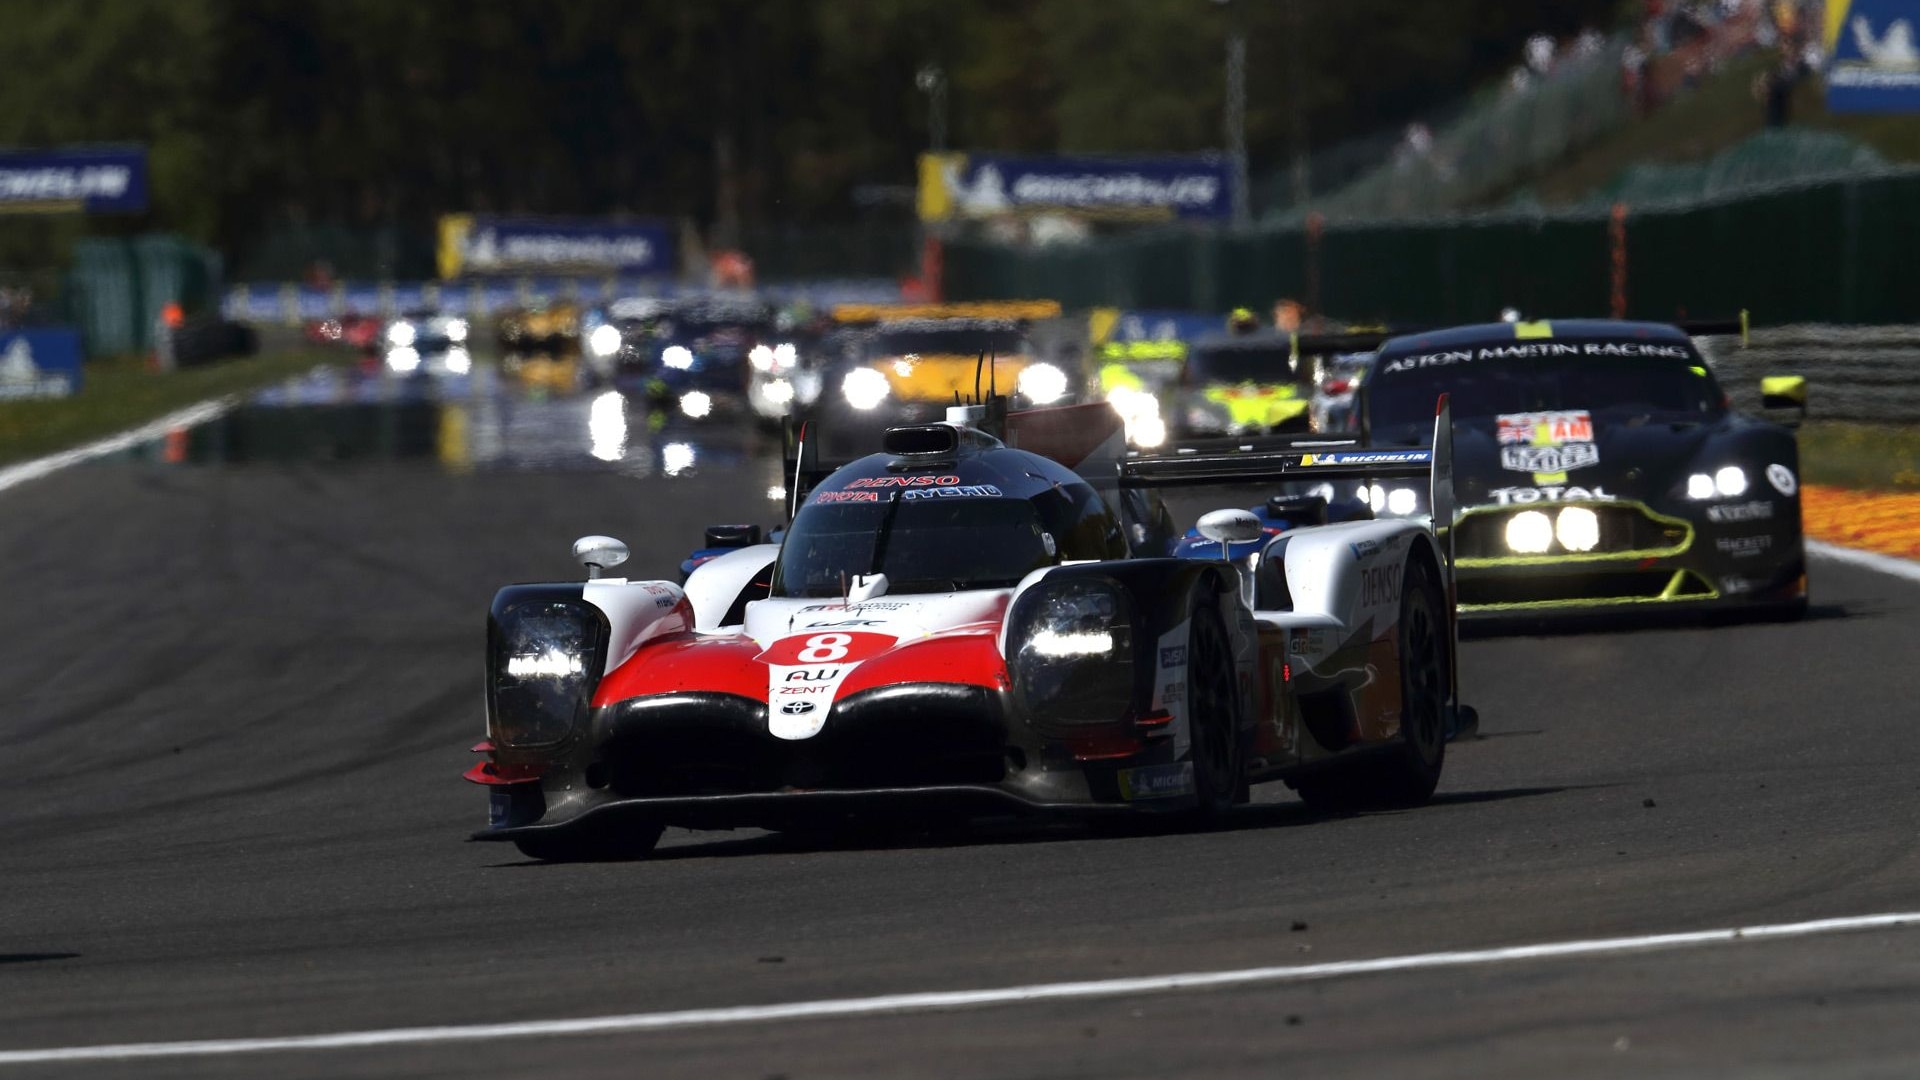 Toyota at the 2018/2019 6 Hours of Spa-Francorchamps